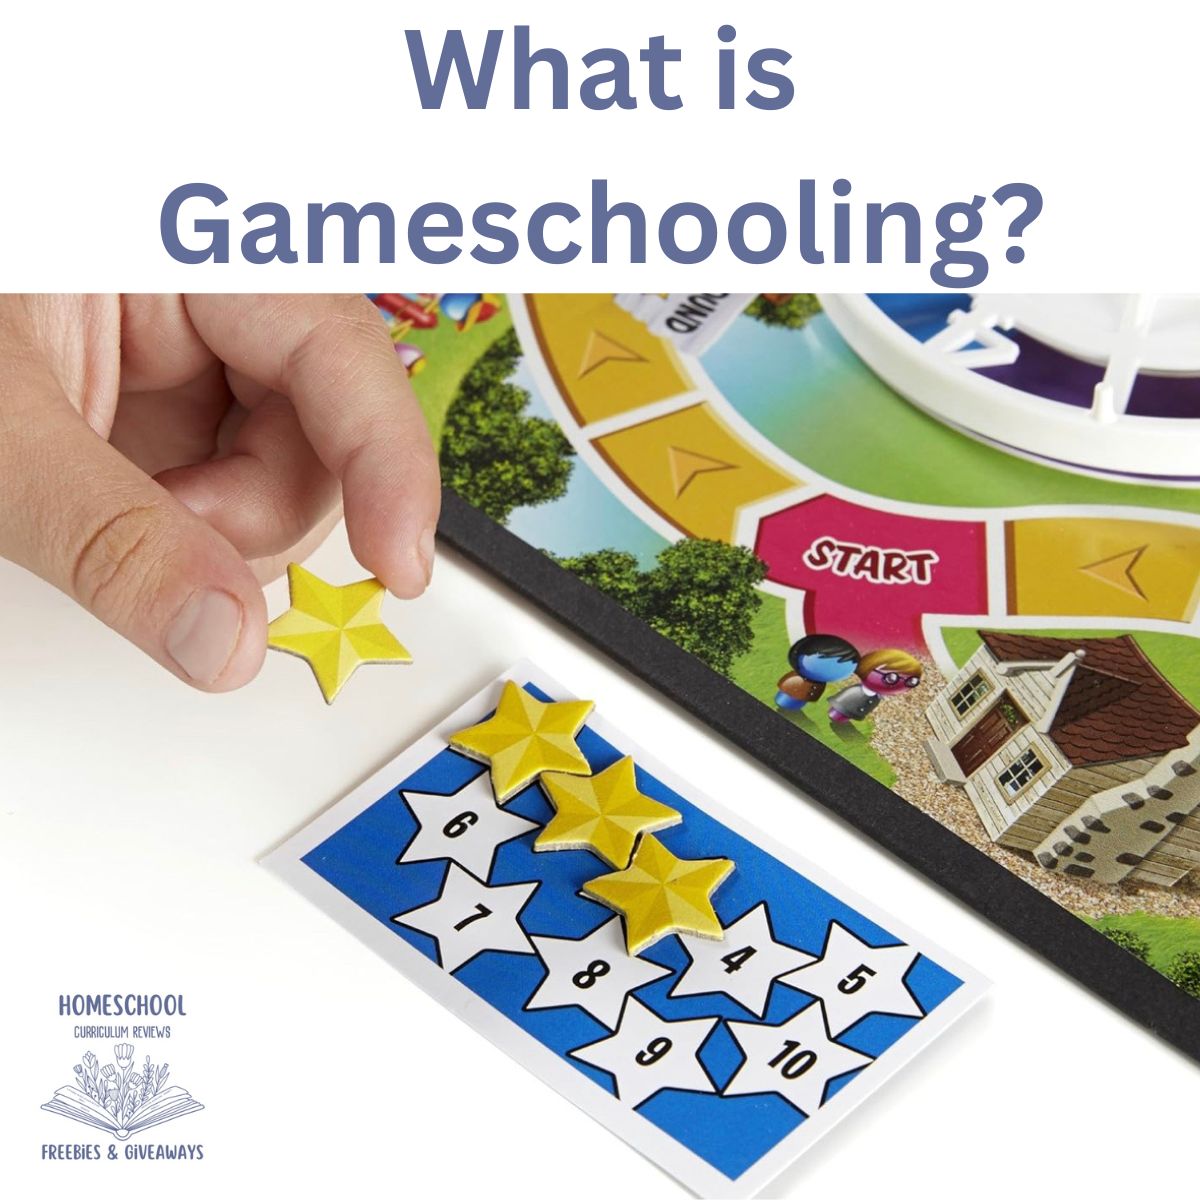 Heading that states "What is Gameschooling?" with a picture of a hand playing a board game along with homeschool freebies and giveaways logo